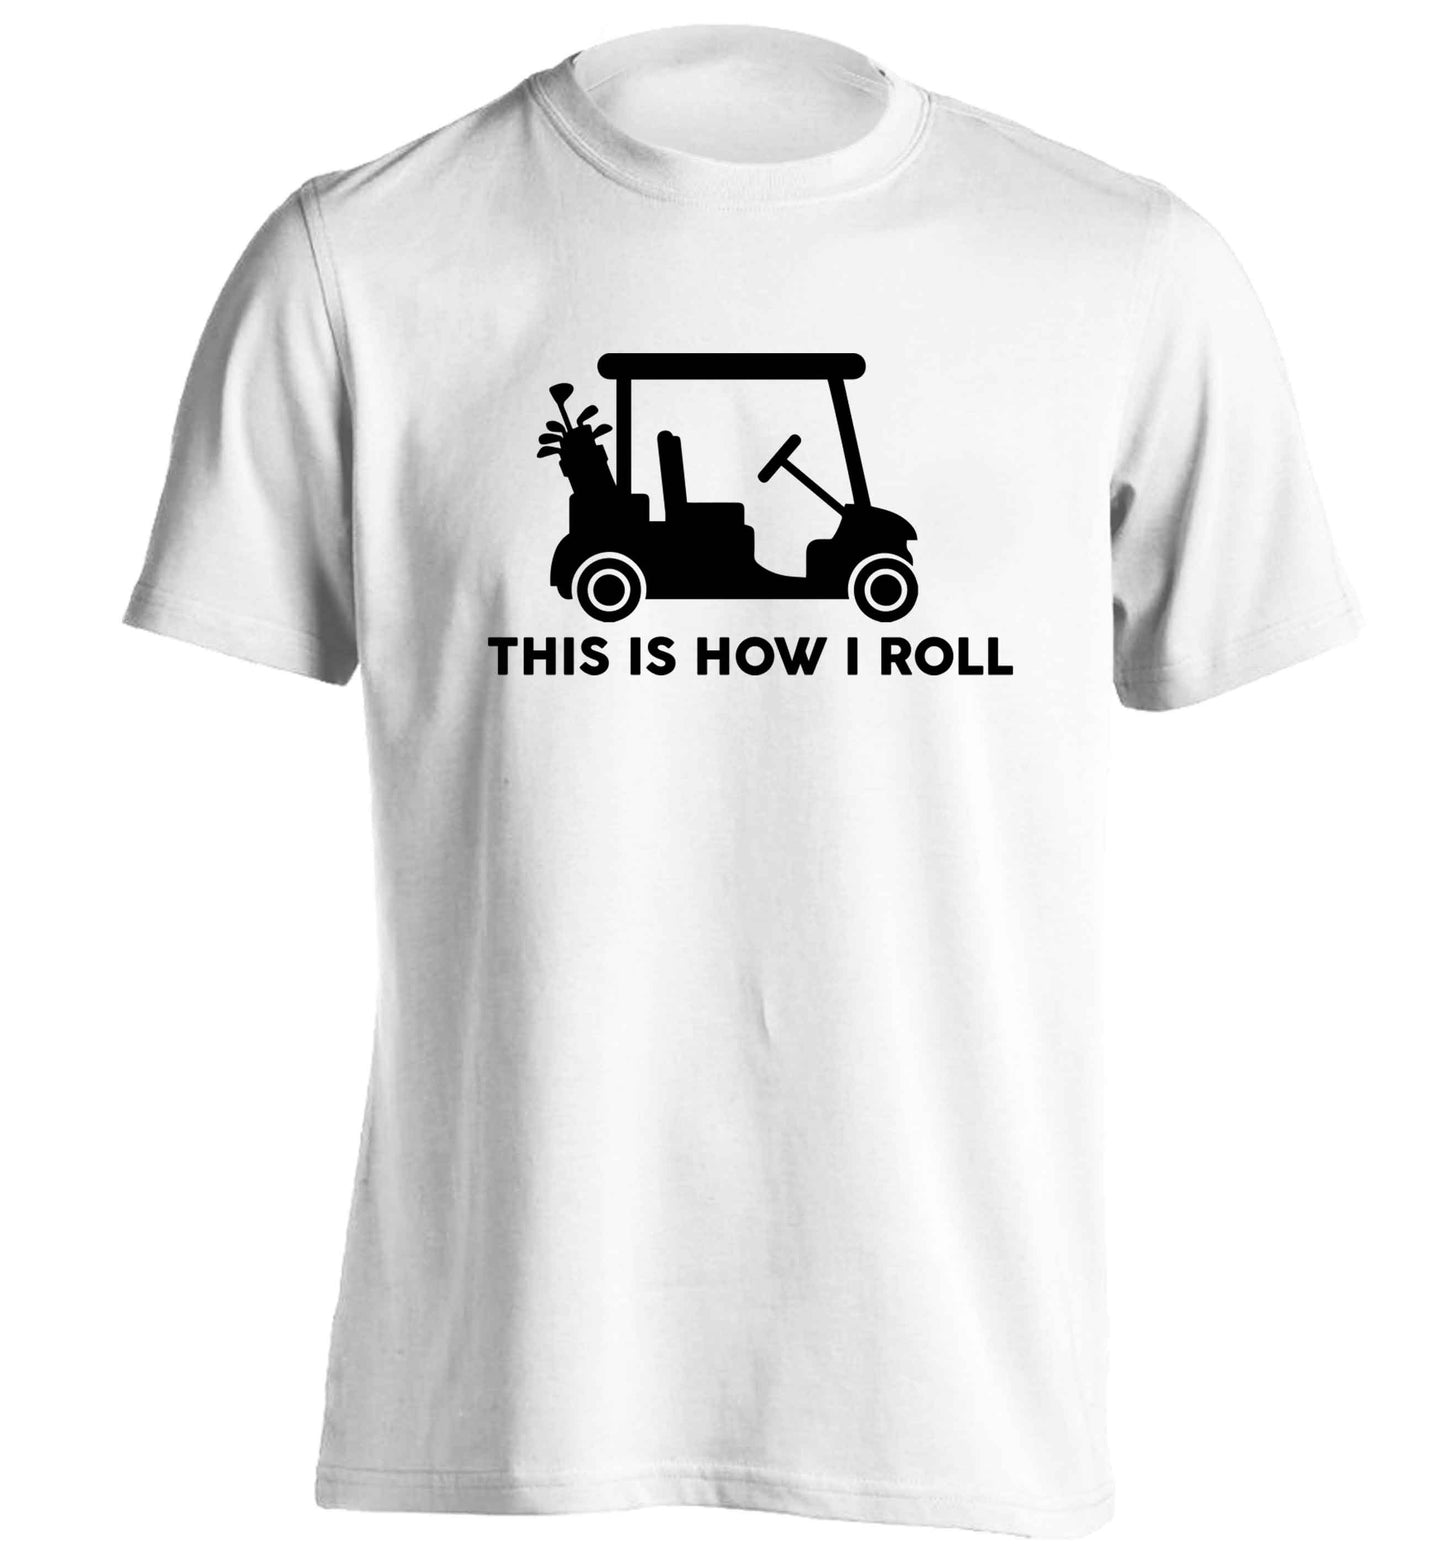 This is how I roll golf cart adults unisex white Tshirt 2XL